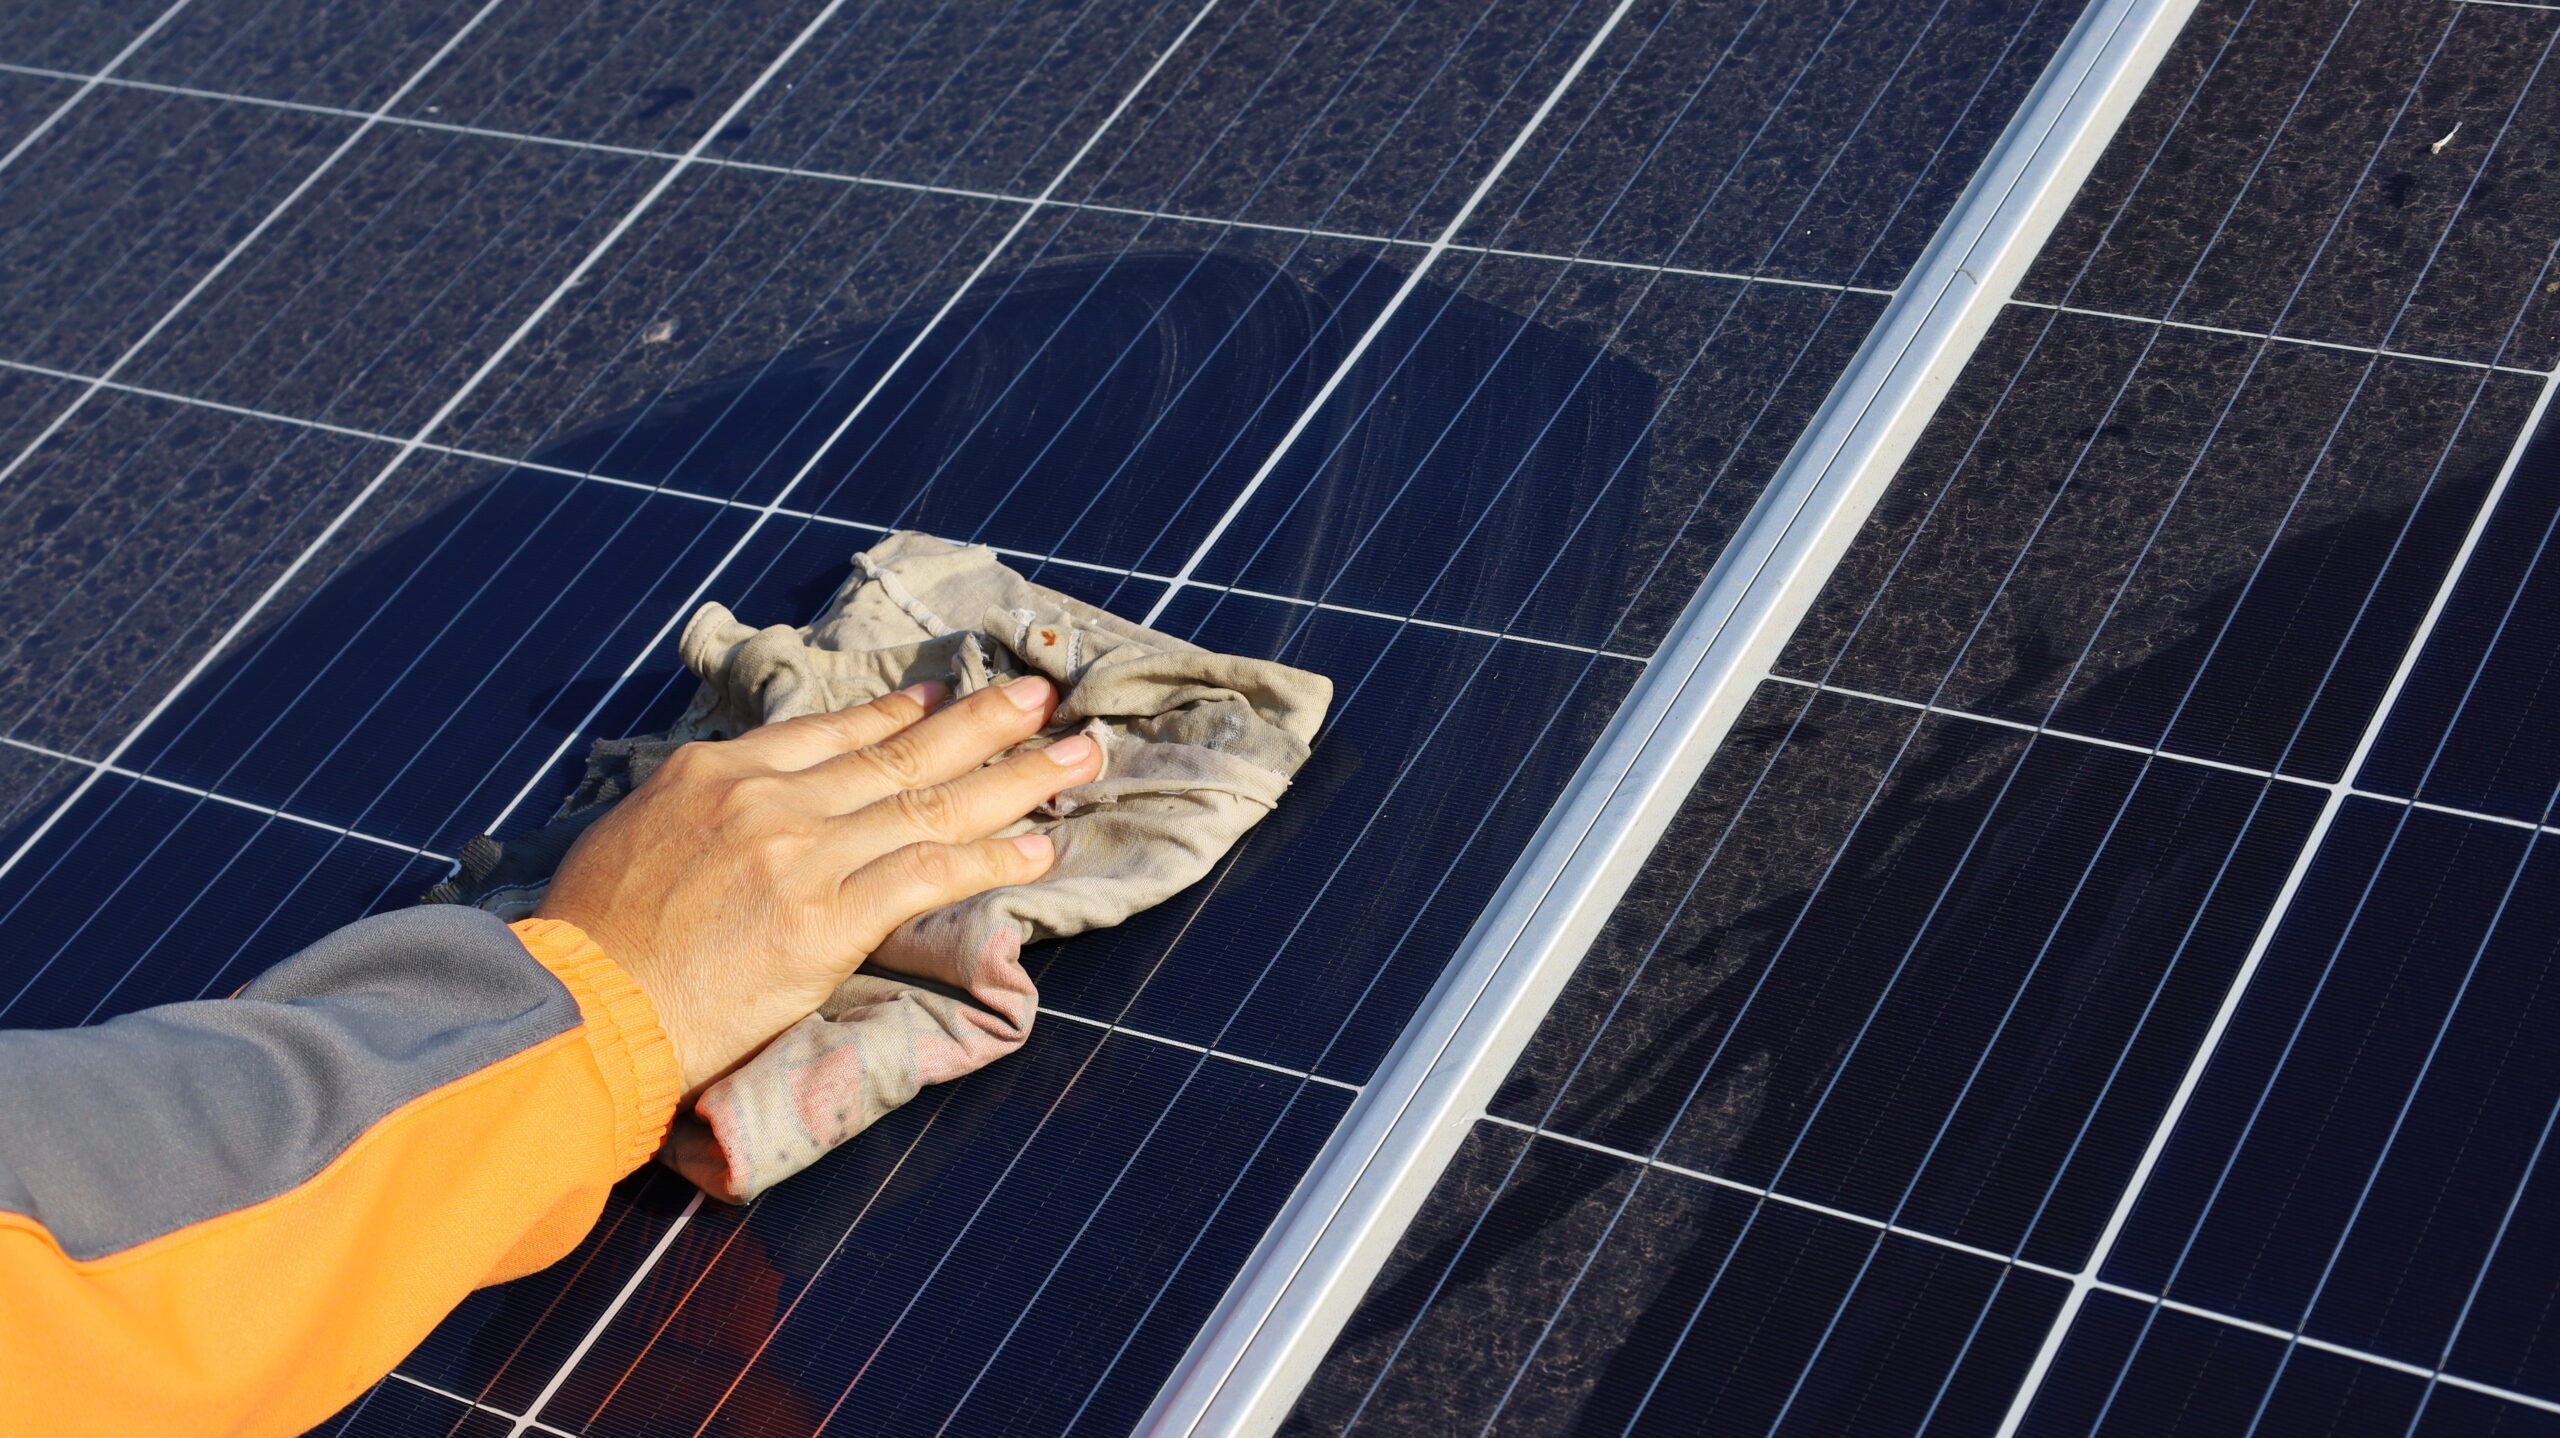 Hand cleaning solar panels. A woman's hands use a towel to wipe